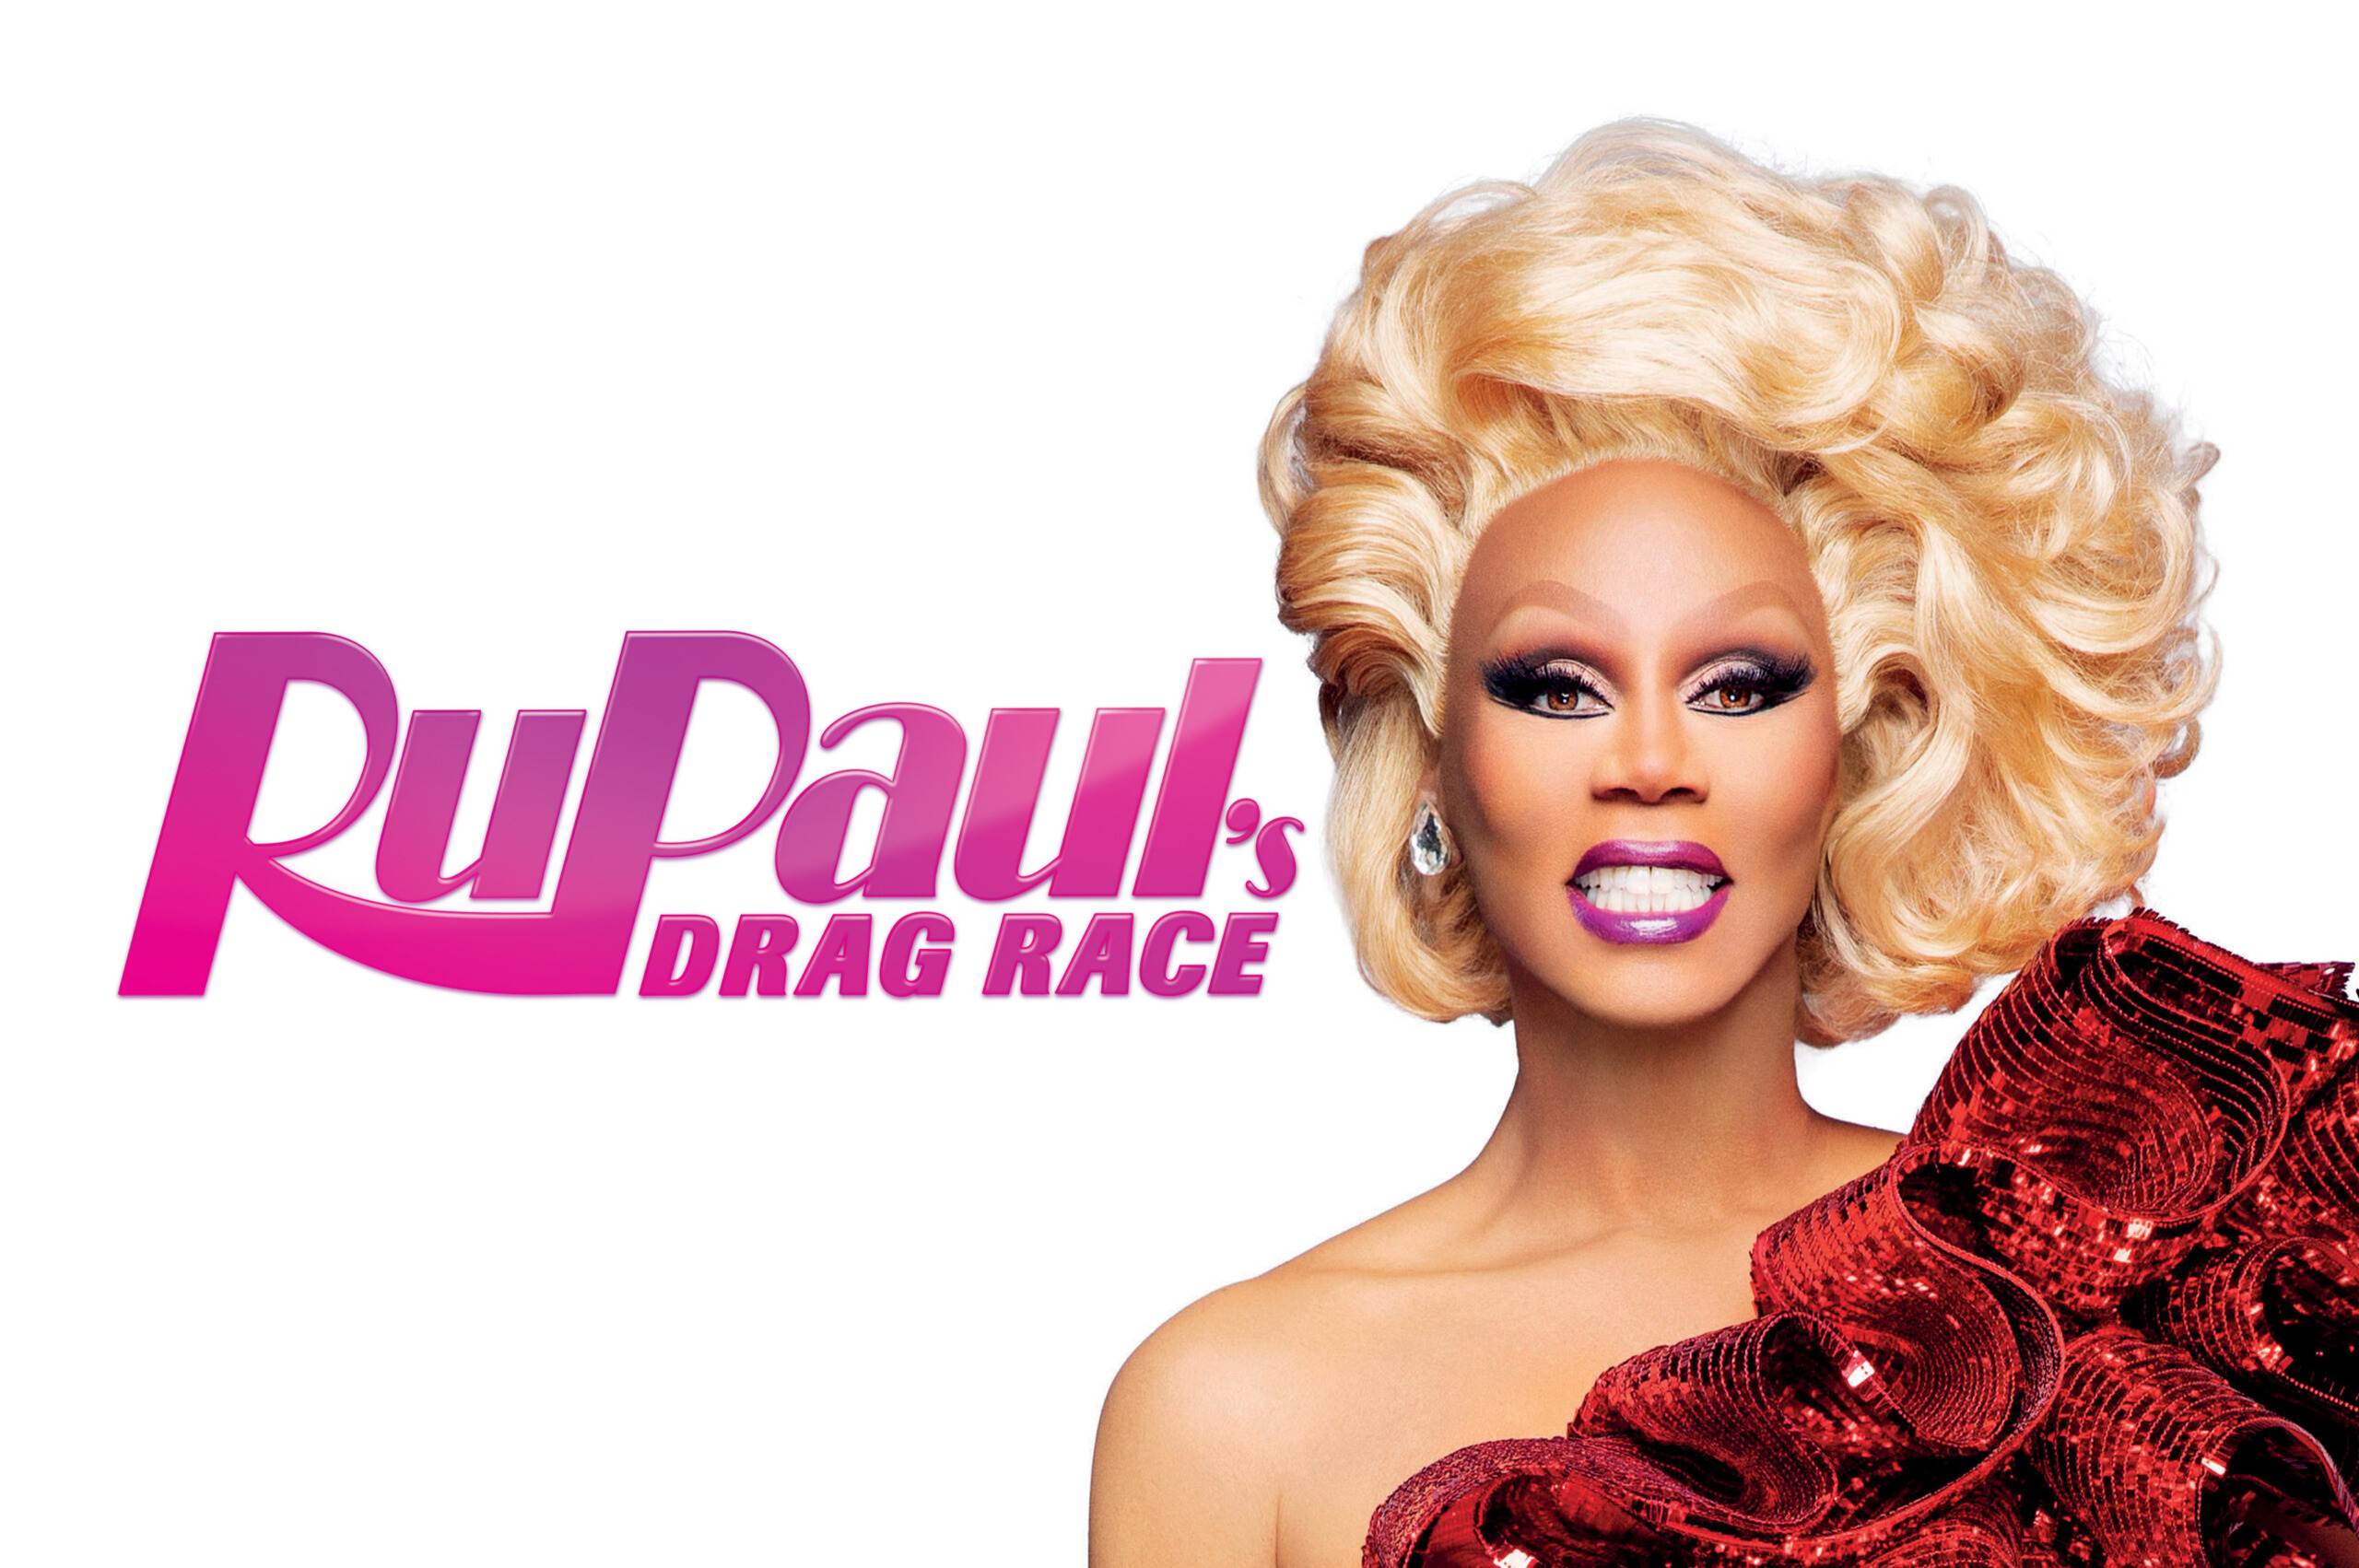 Can You Name These Drag Queens From RuPaul's Drag Race? Trivia (HARD)